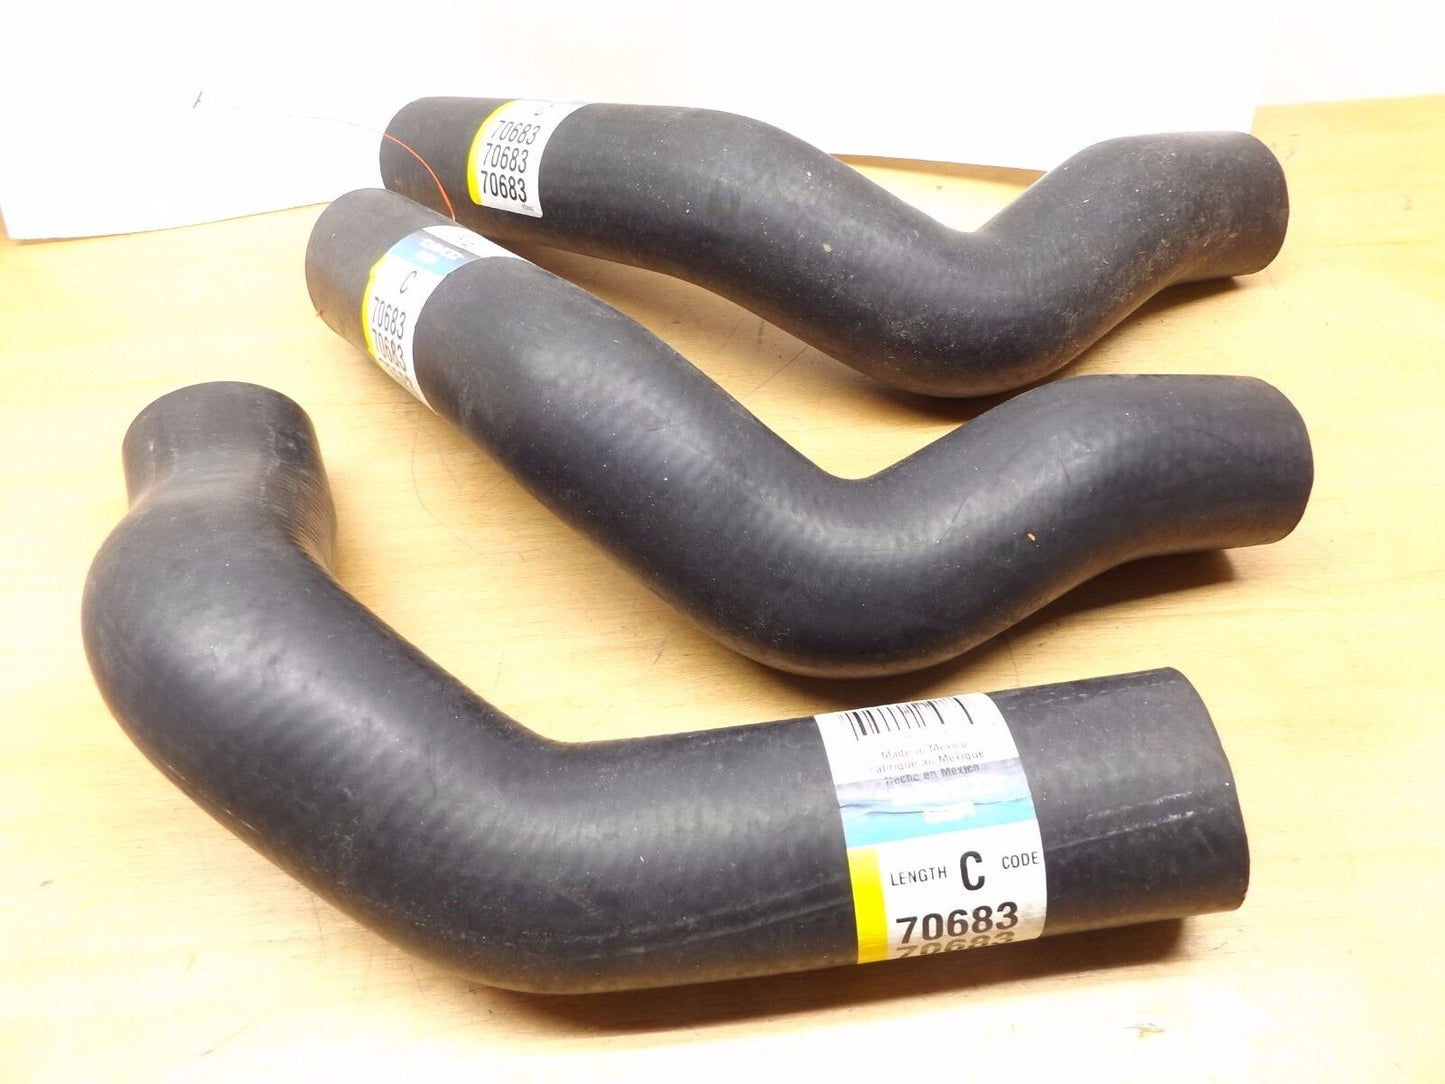 LOT OF 3 DAYCO 70683 RADIATOR HOSE FOR 70-76 FORD F-350